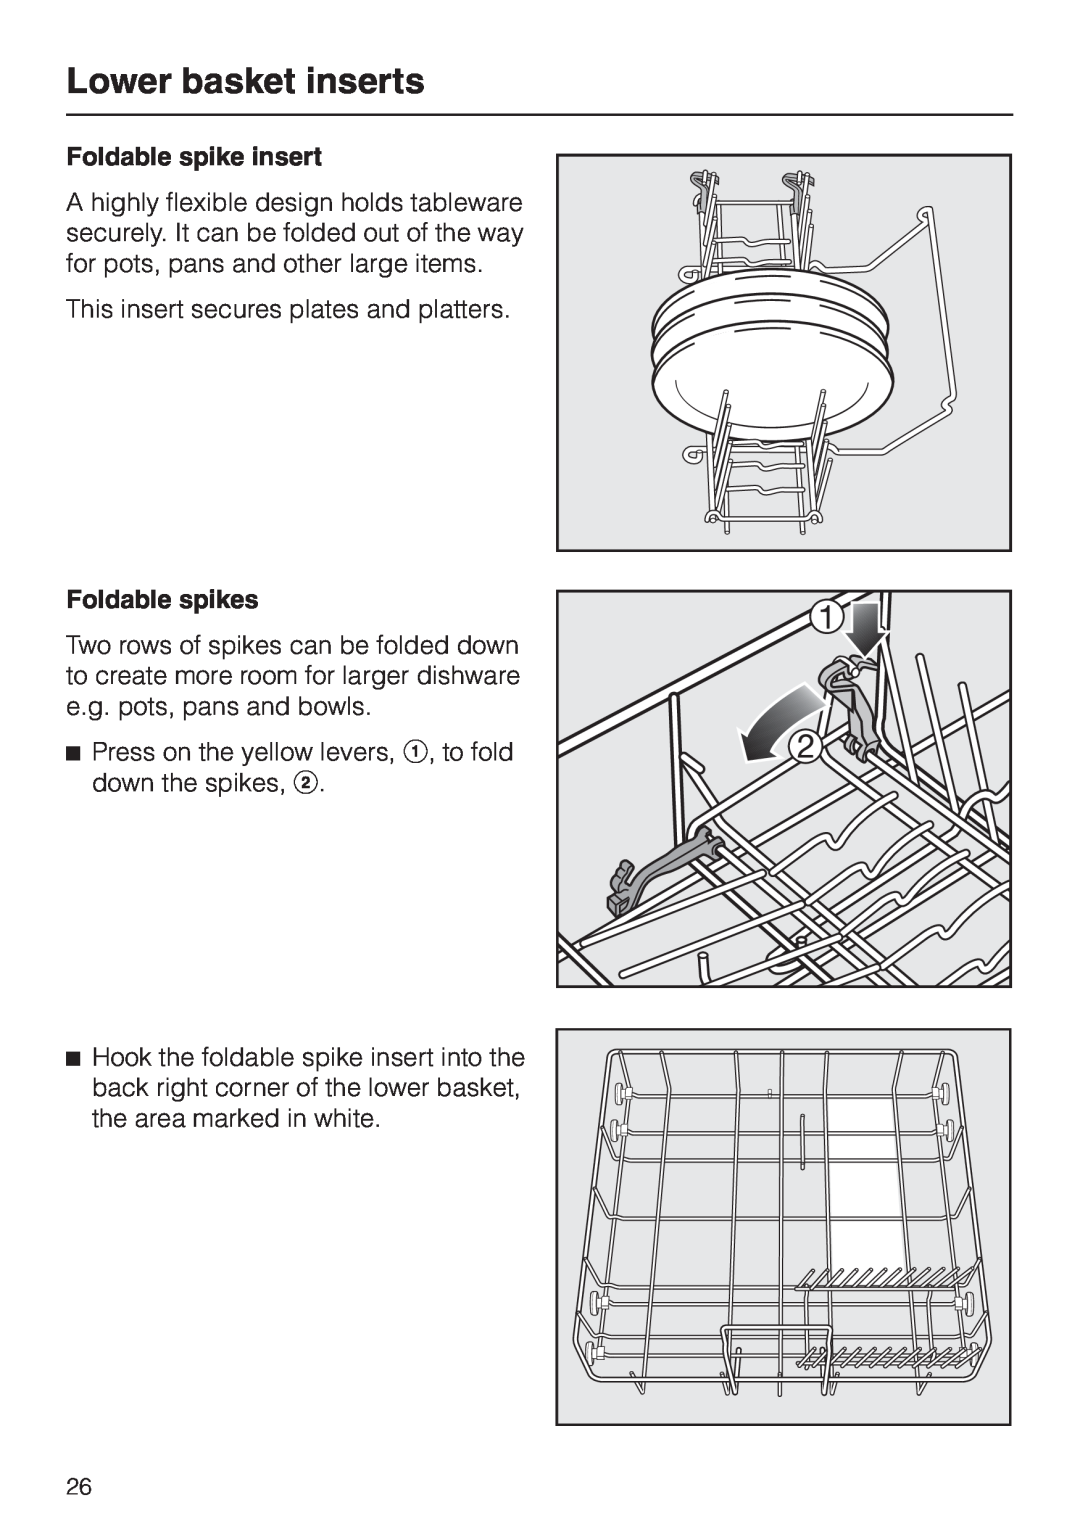 Miele HG01 operating instructions Foldable spike insert, Foldable spikes, Lower basket inserts 